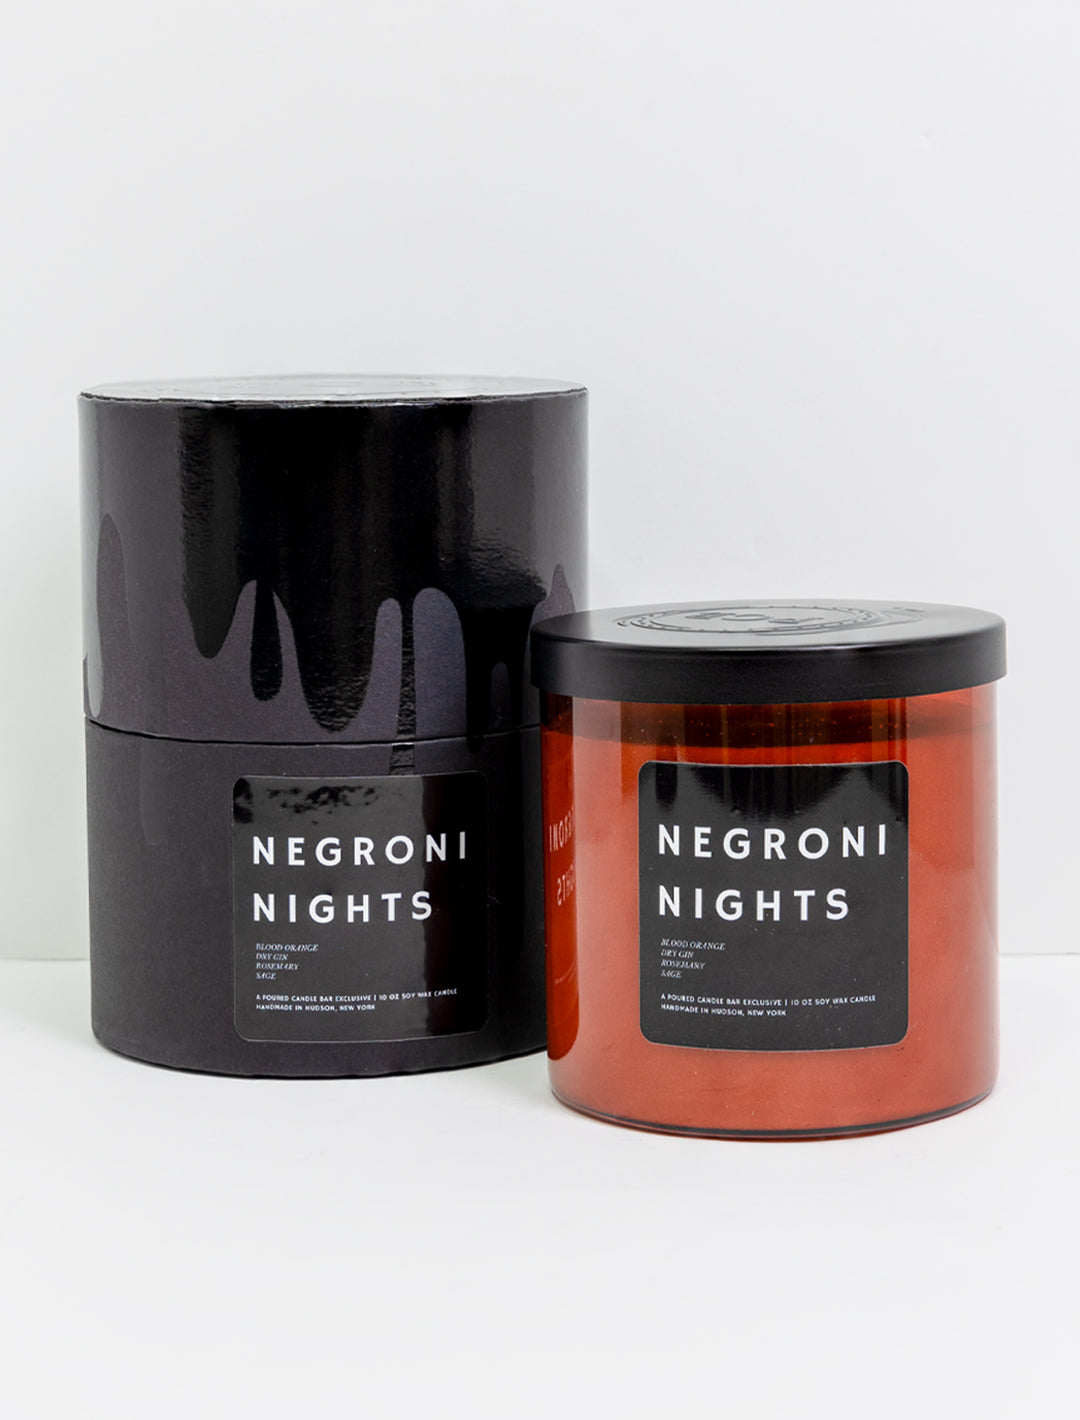 Poured Candle Bar's negroni nights candle and packaging.